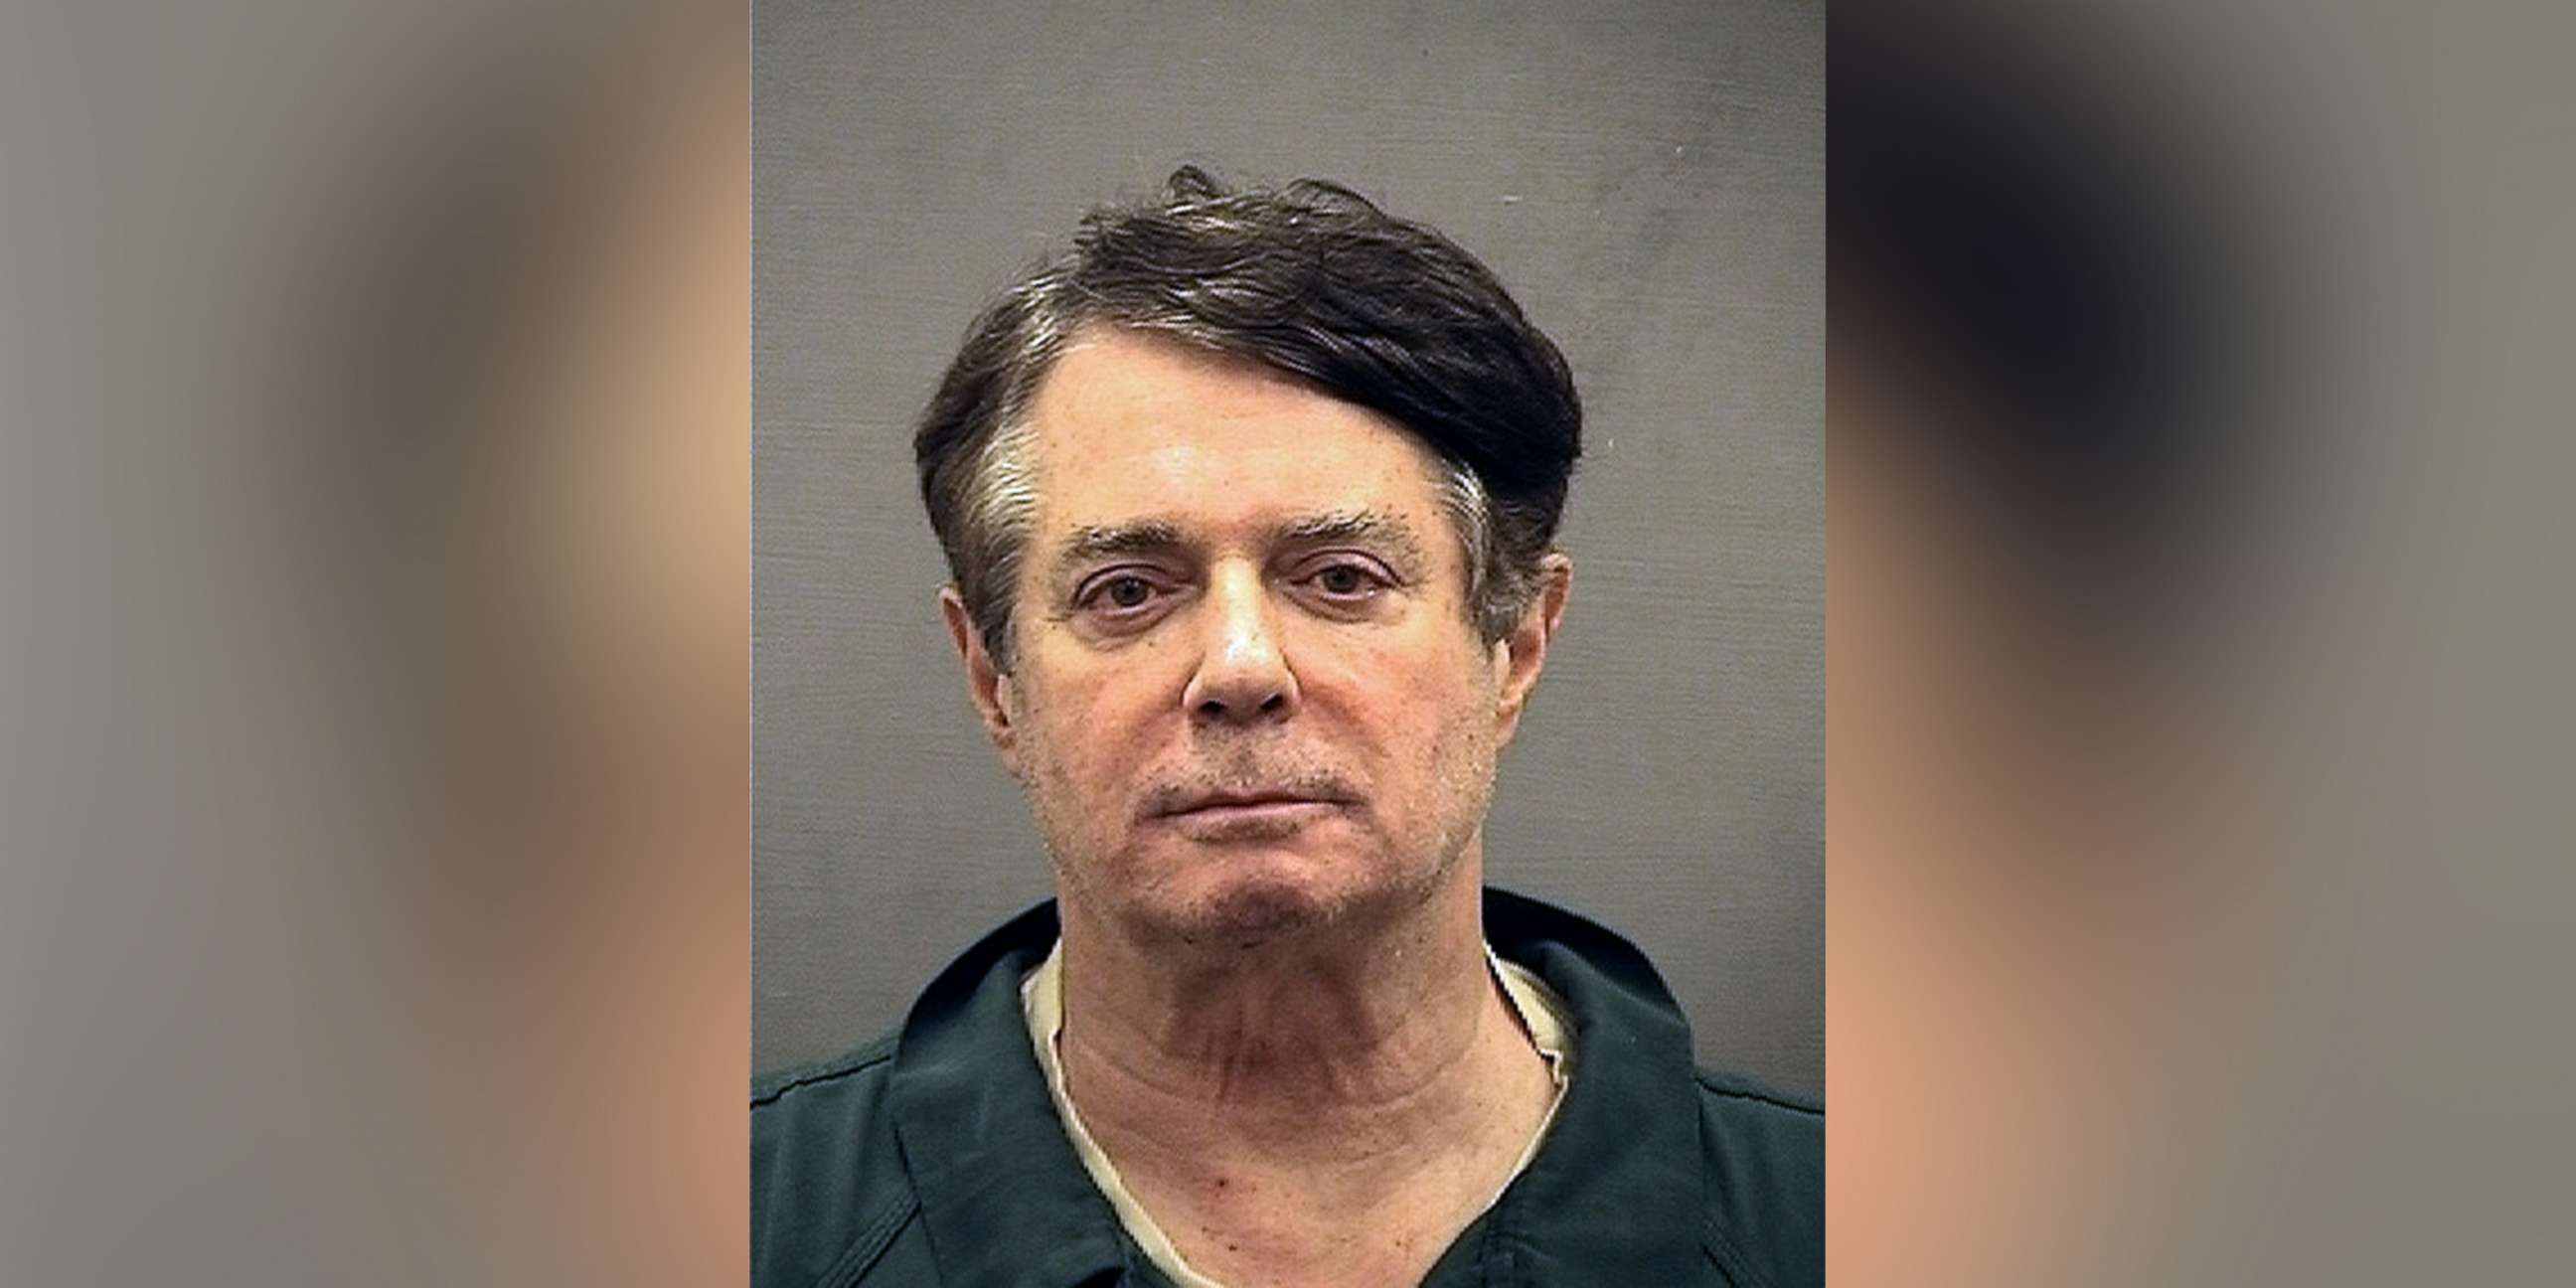 PHOTO: Paul Manafort in a booking photo released by the Alexandria (Va.) Sheriff's Office, July 12, 2018.